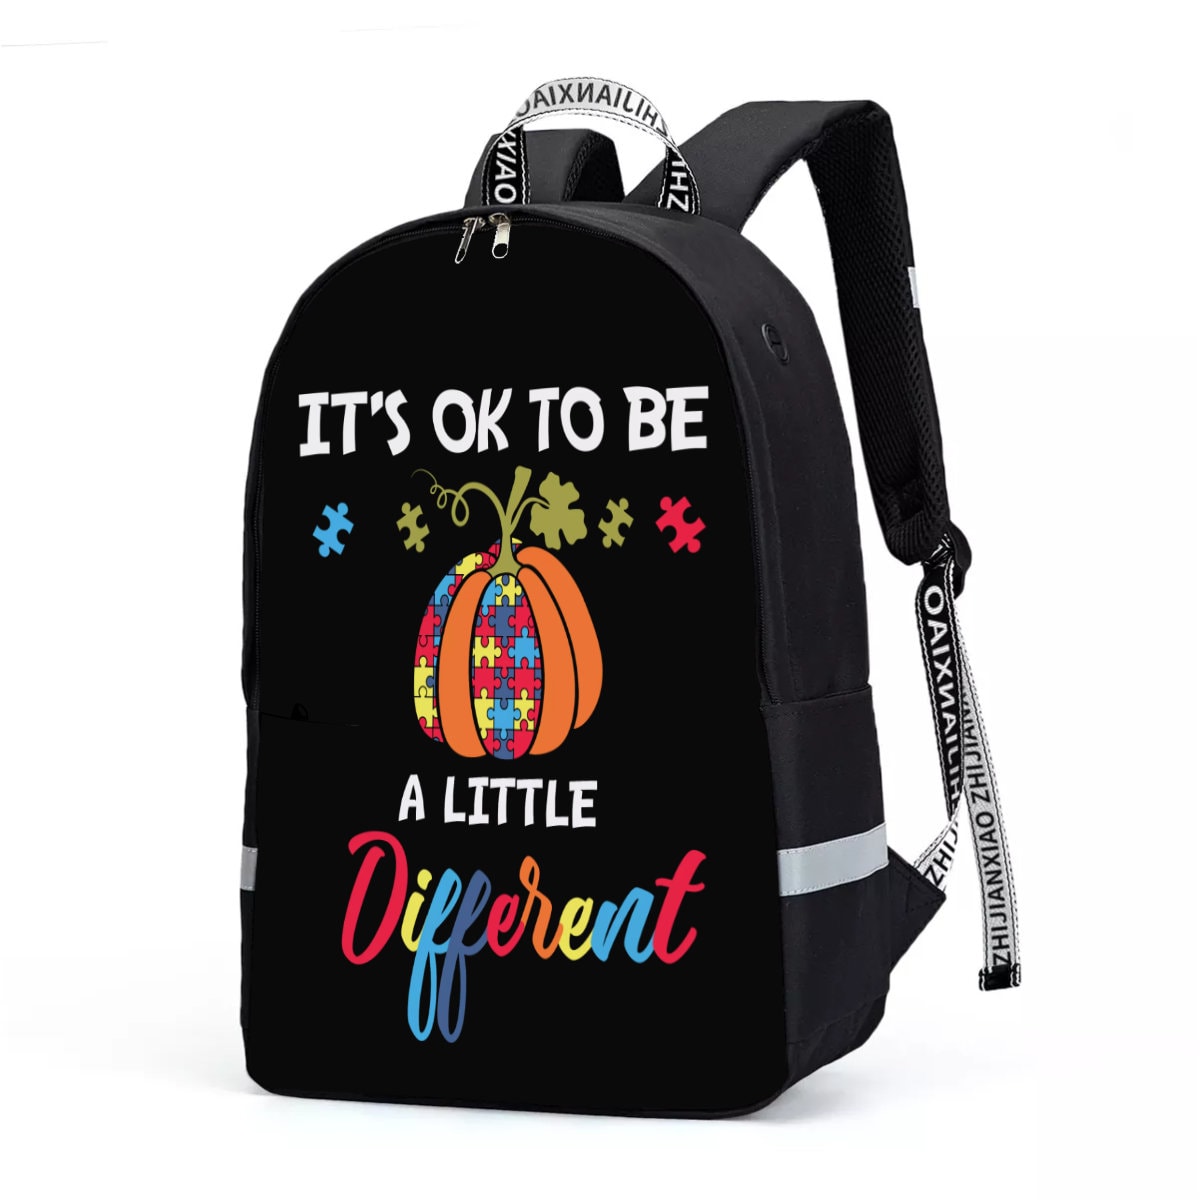 Dare to be Yourself Autism Awareness Backpack With Reflective Bar - Chloe Lambertin